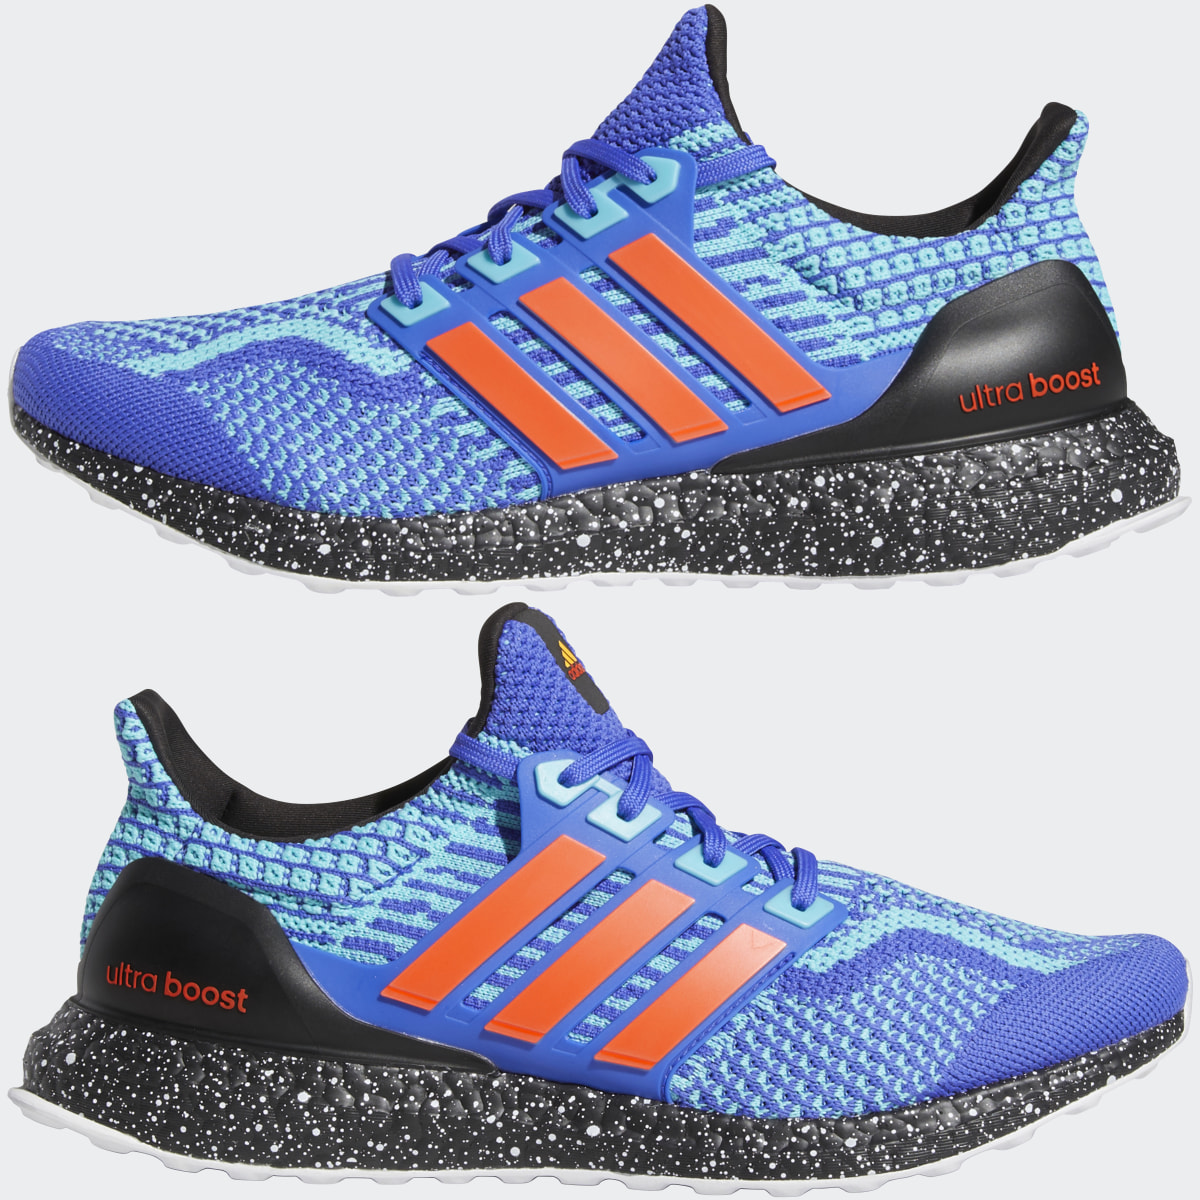 Adidas Ultraboost 5.0 DNA Shoes. 8